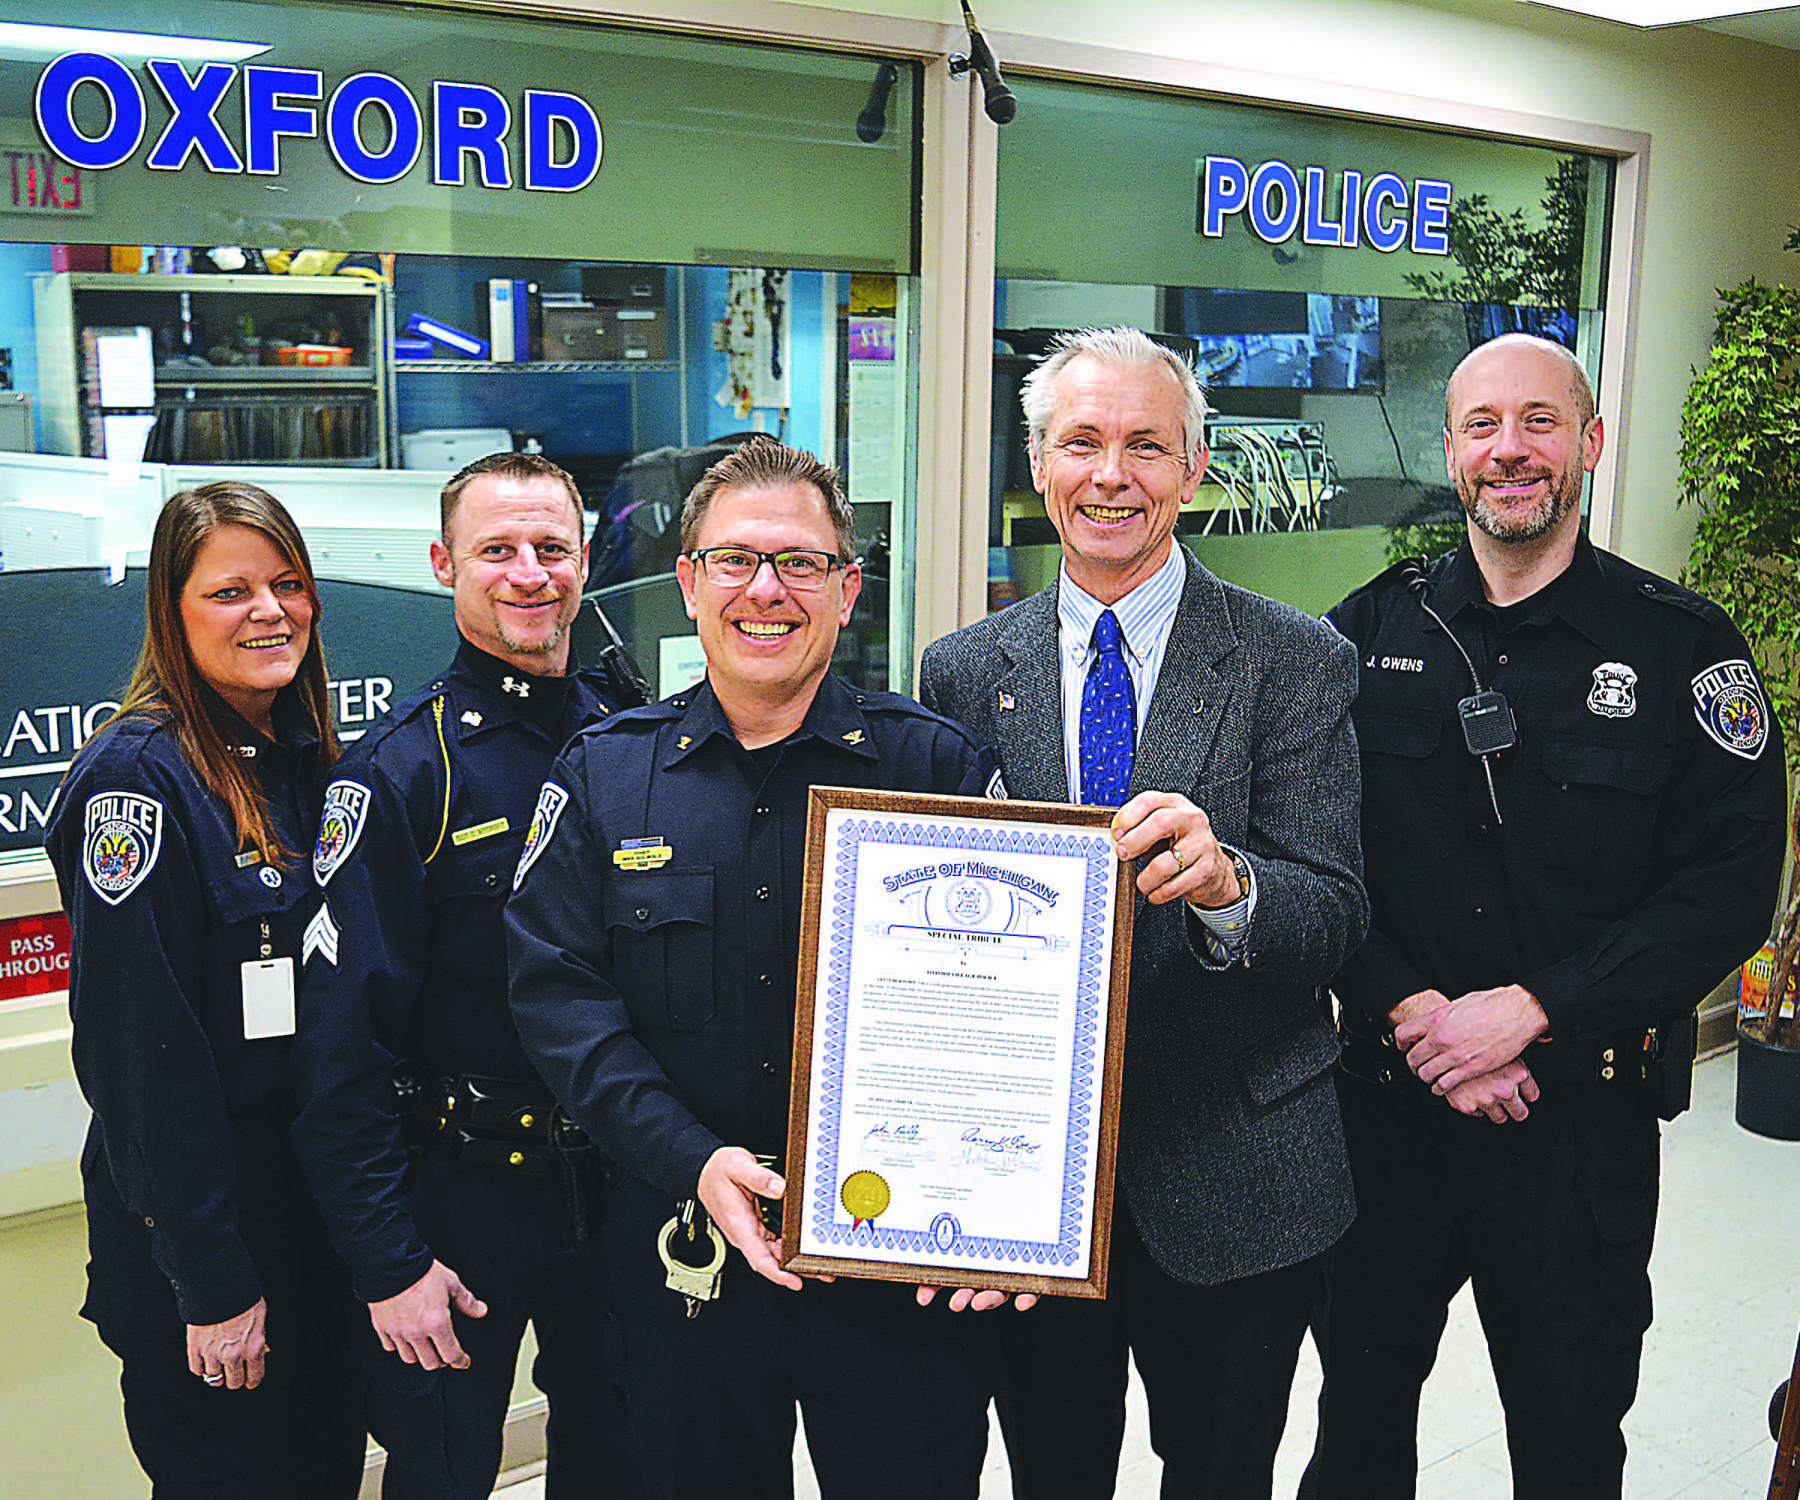 Oxford Village Police Chief Mike Solwold (center left) received a special tribute for National Law Enforcement Recognition Day from State Rep. John Reilly (center right). Flanking them are (from left) Service Officer Robyn Zanin, Sgt. Clint Ascroft and Officer James Owens. Photo by C.J. Carnacchio.